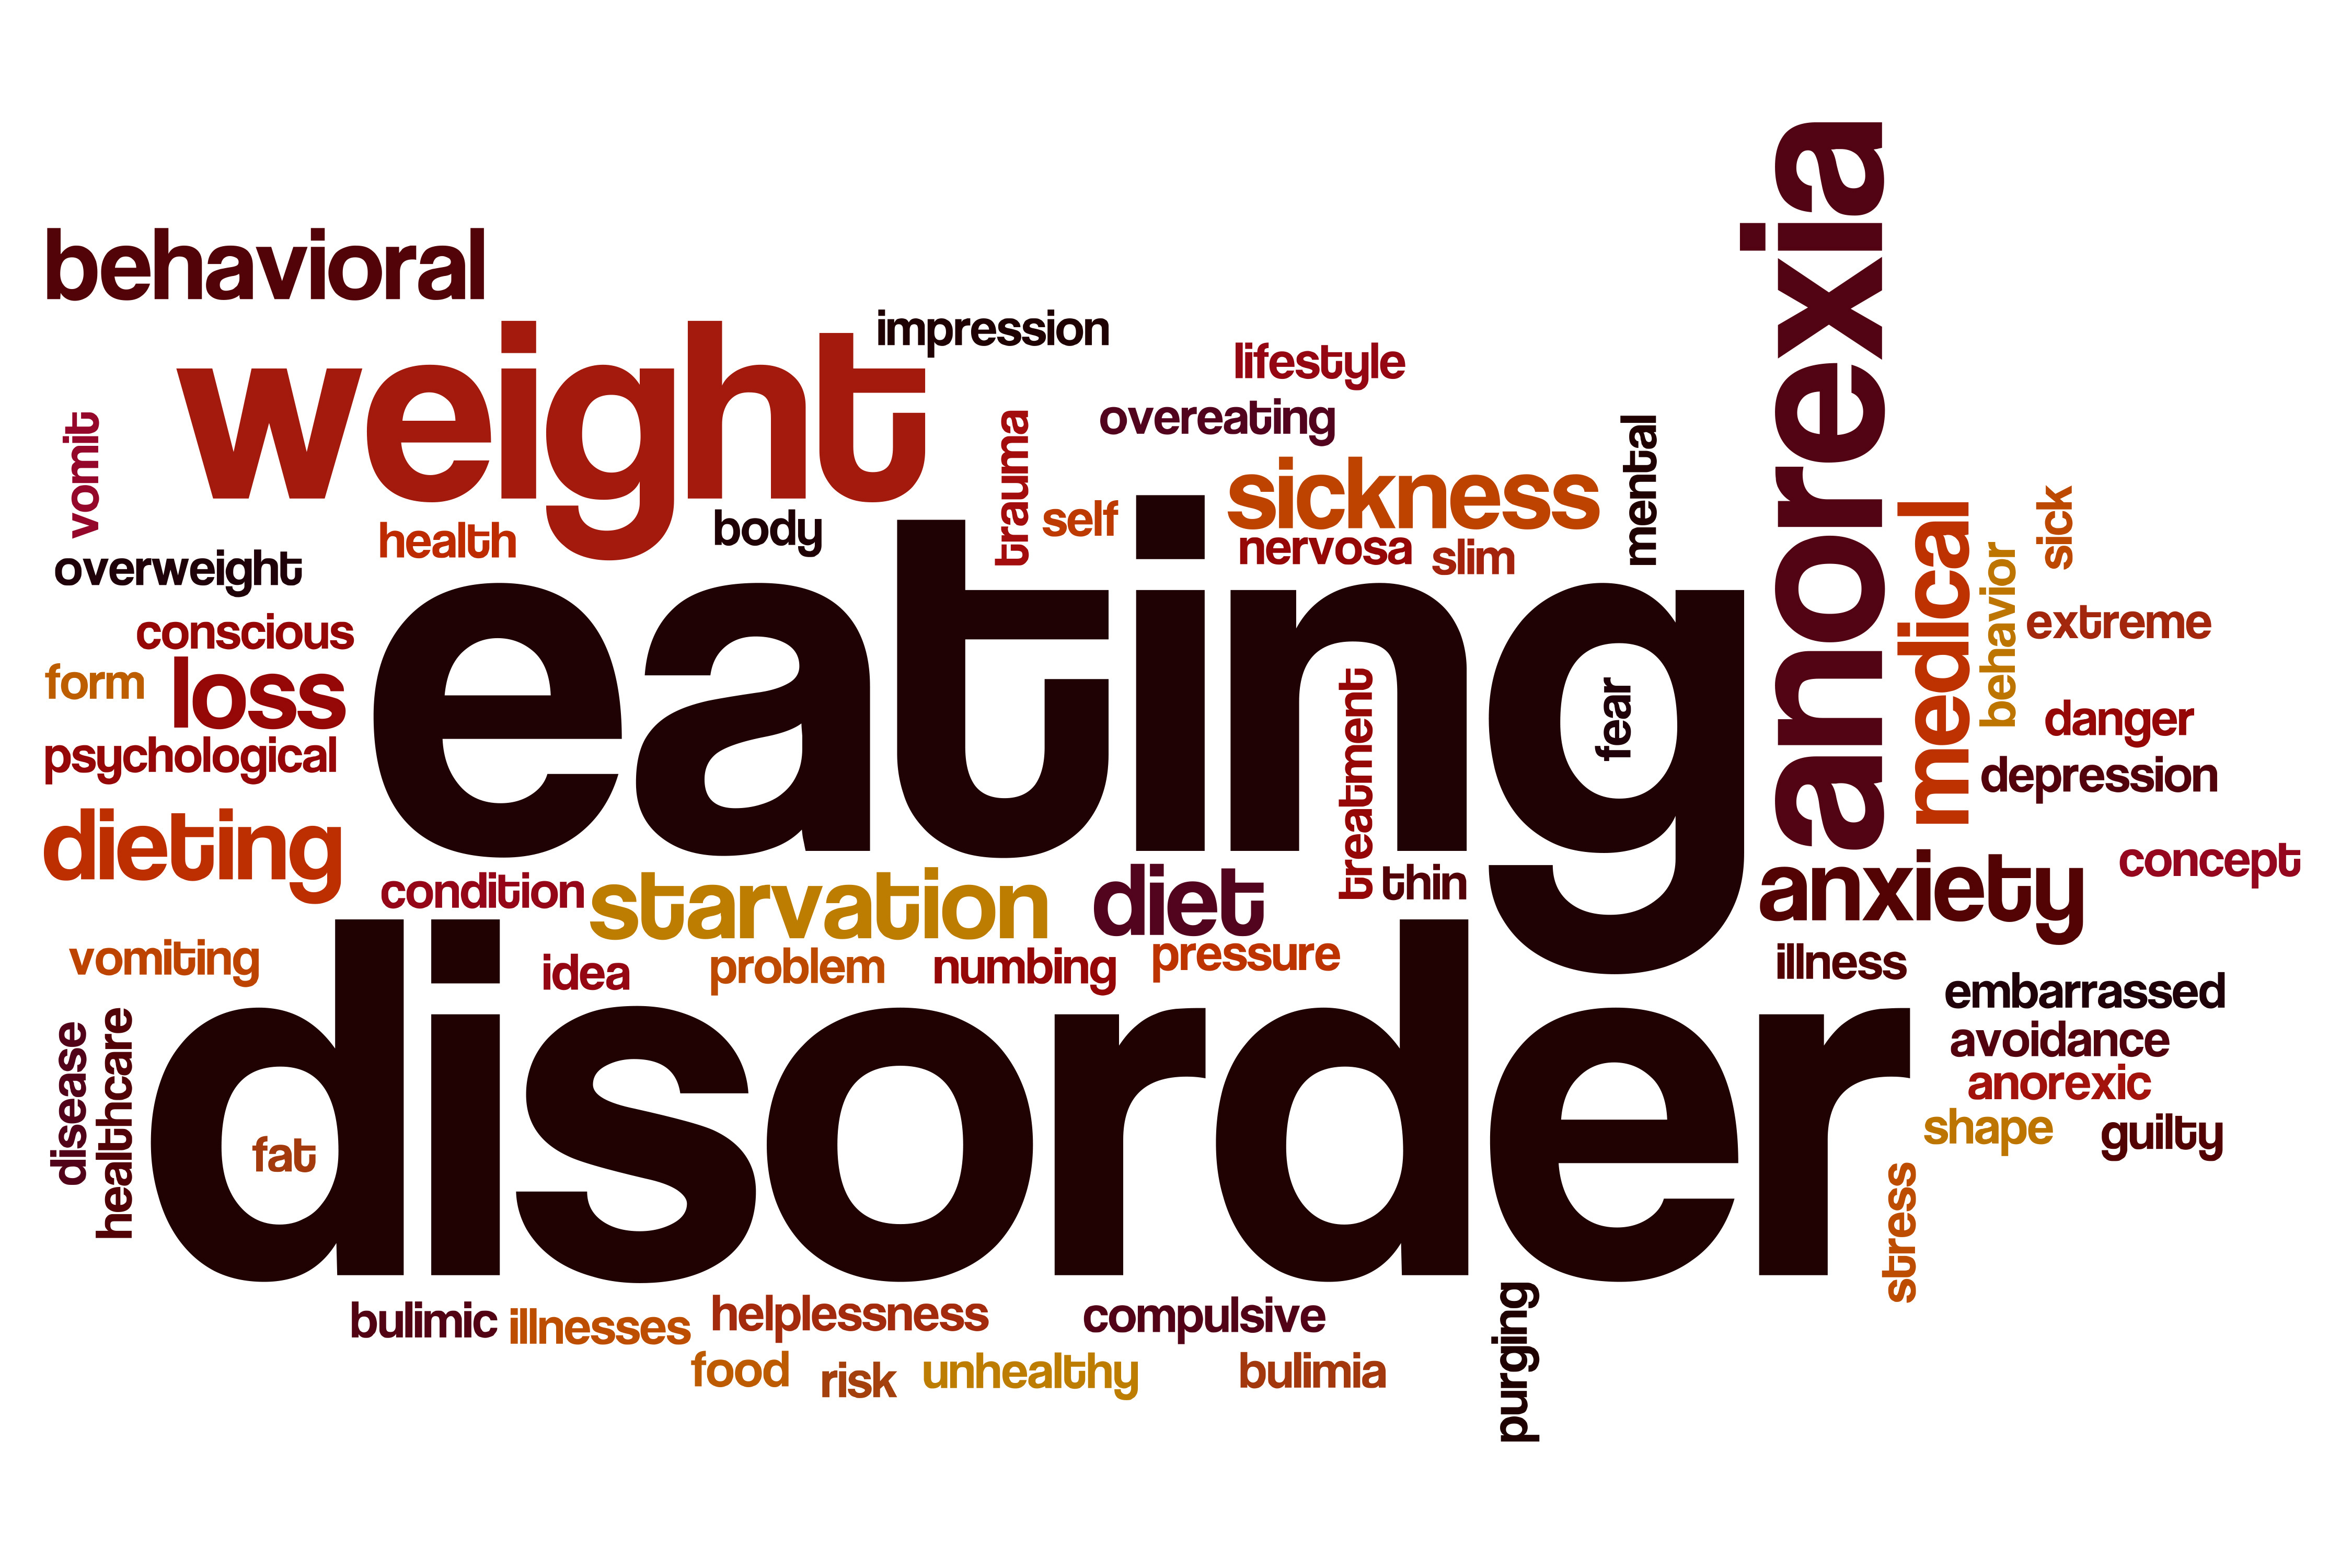 Signs and symptoms of eating disorders